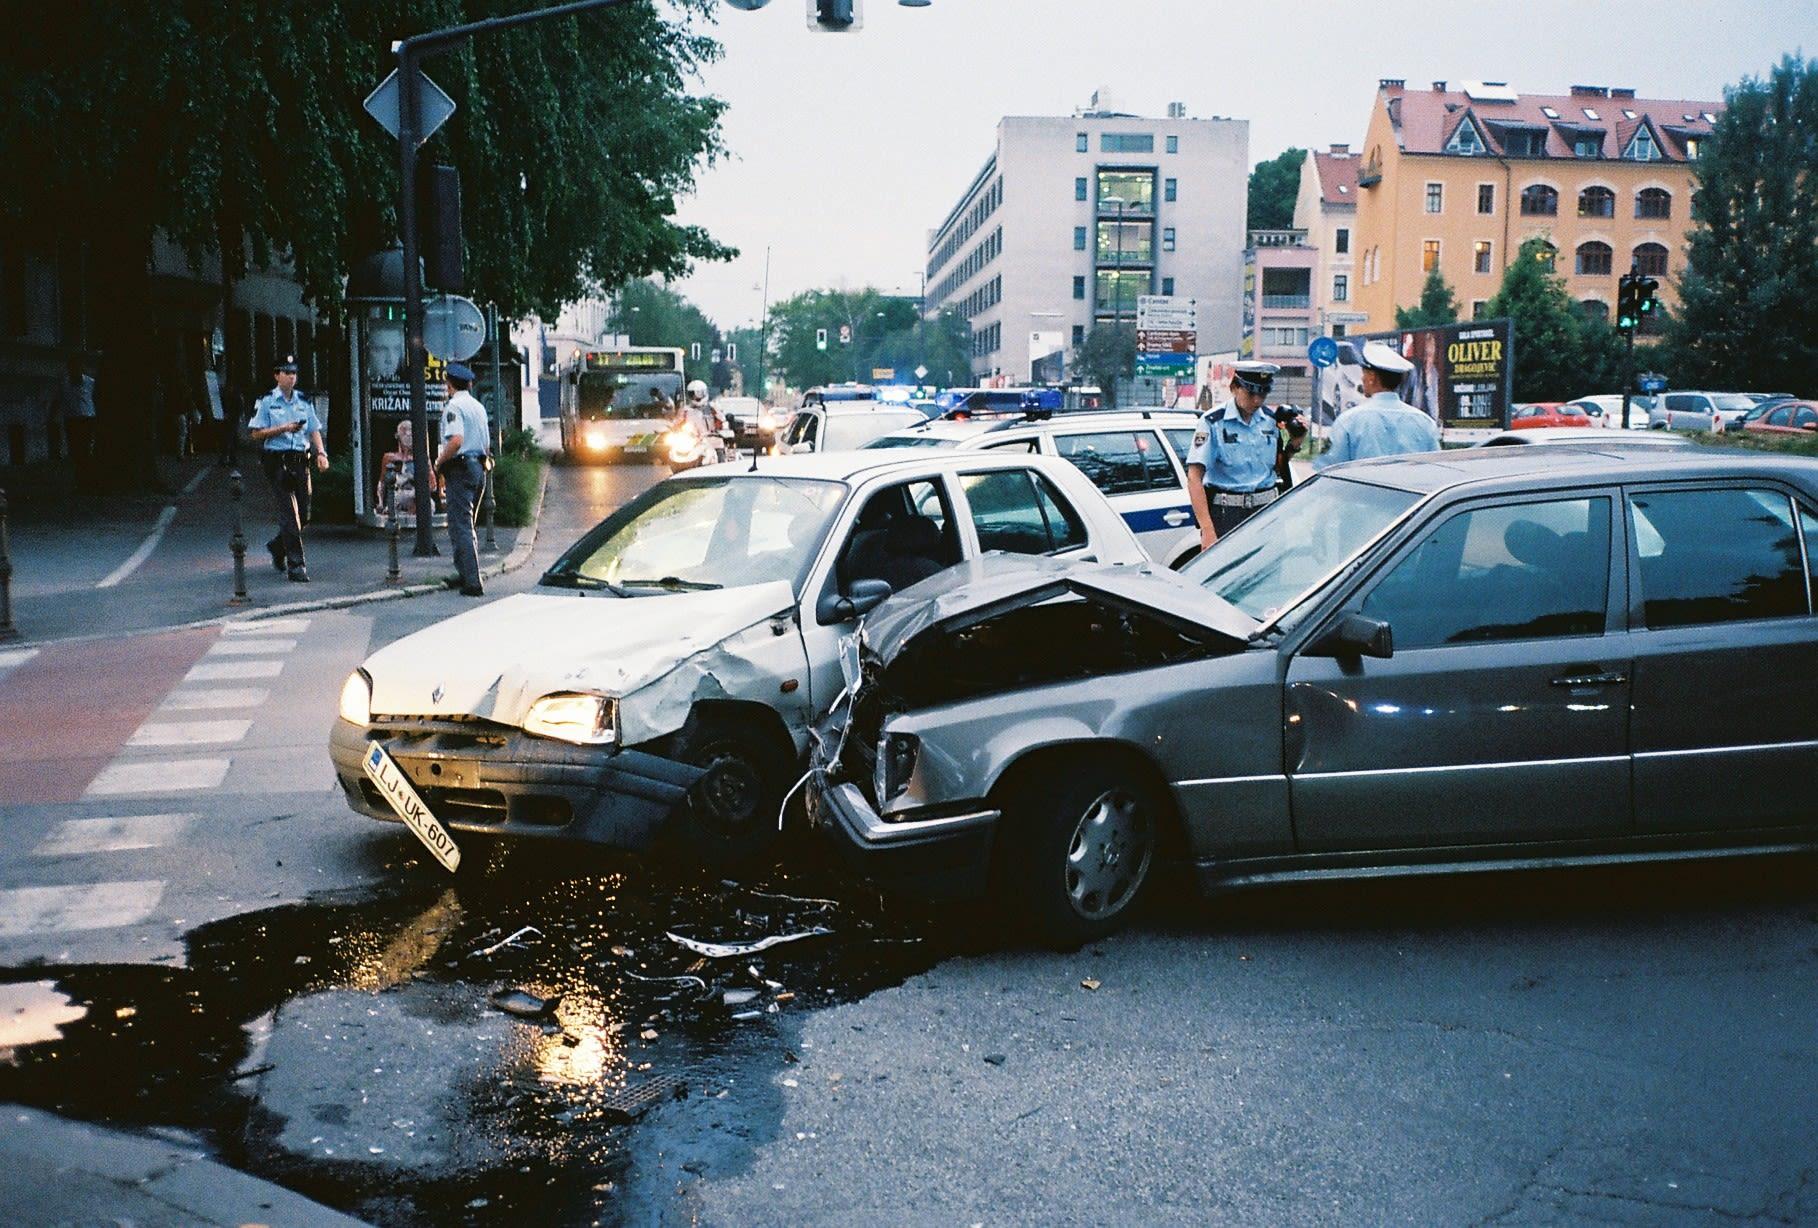 Do You Need a Lawyer After a Car Crash